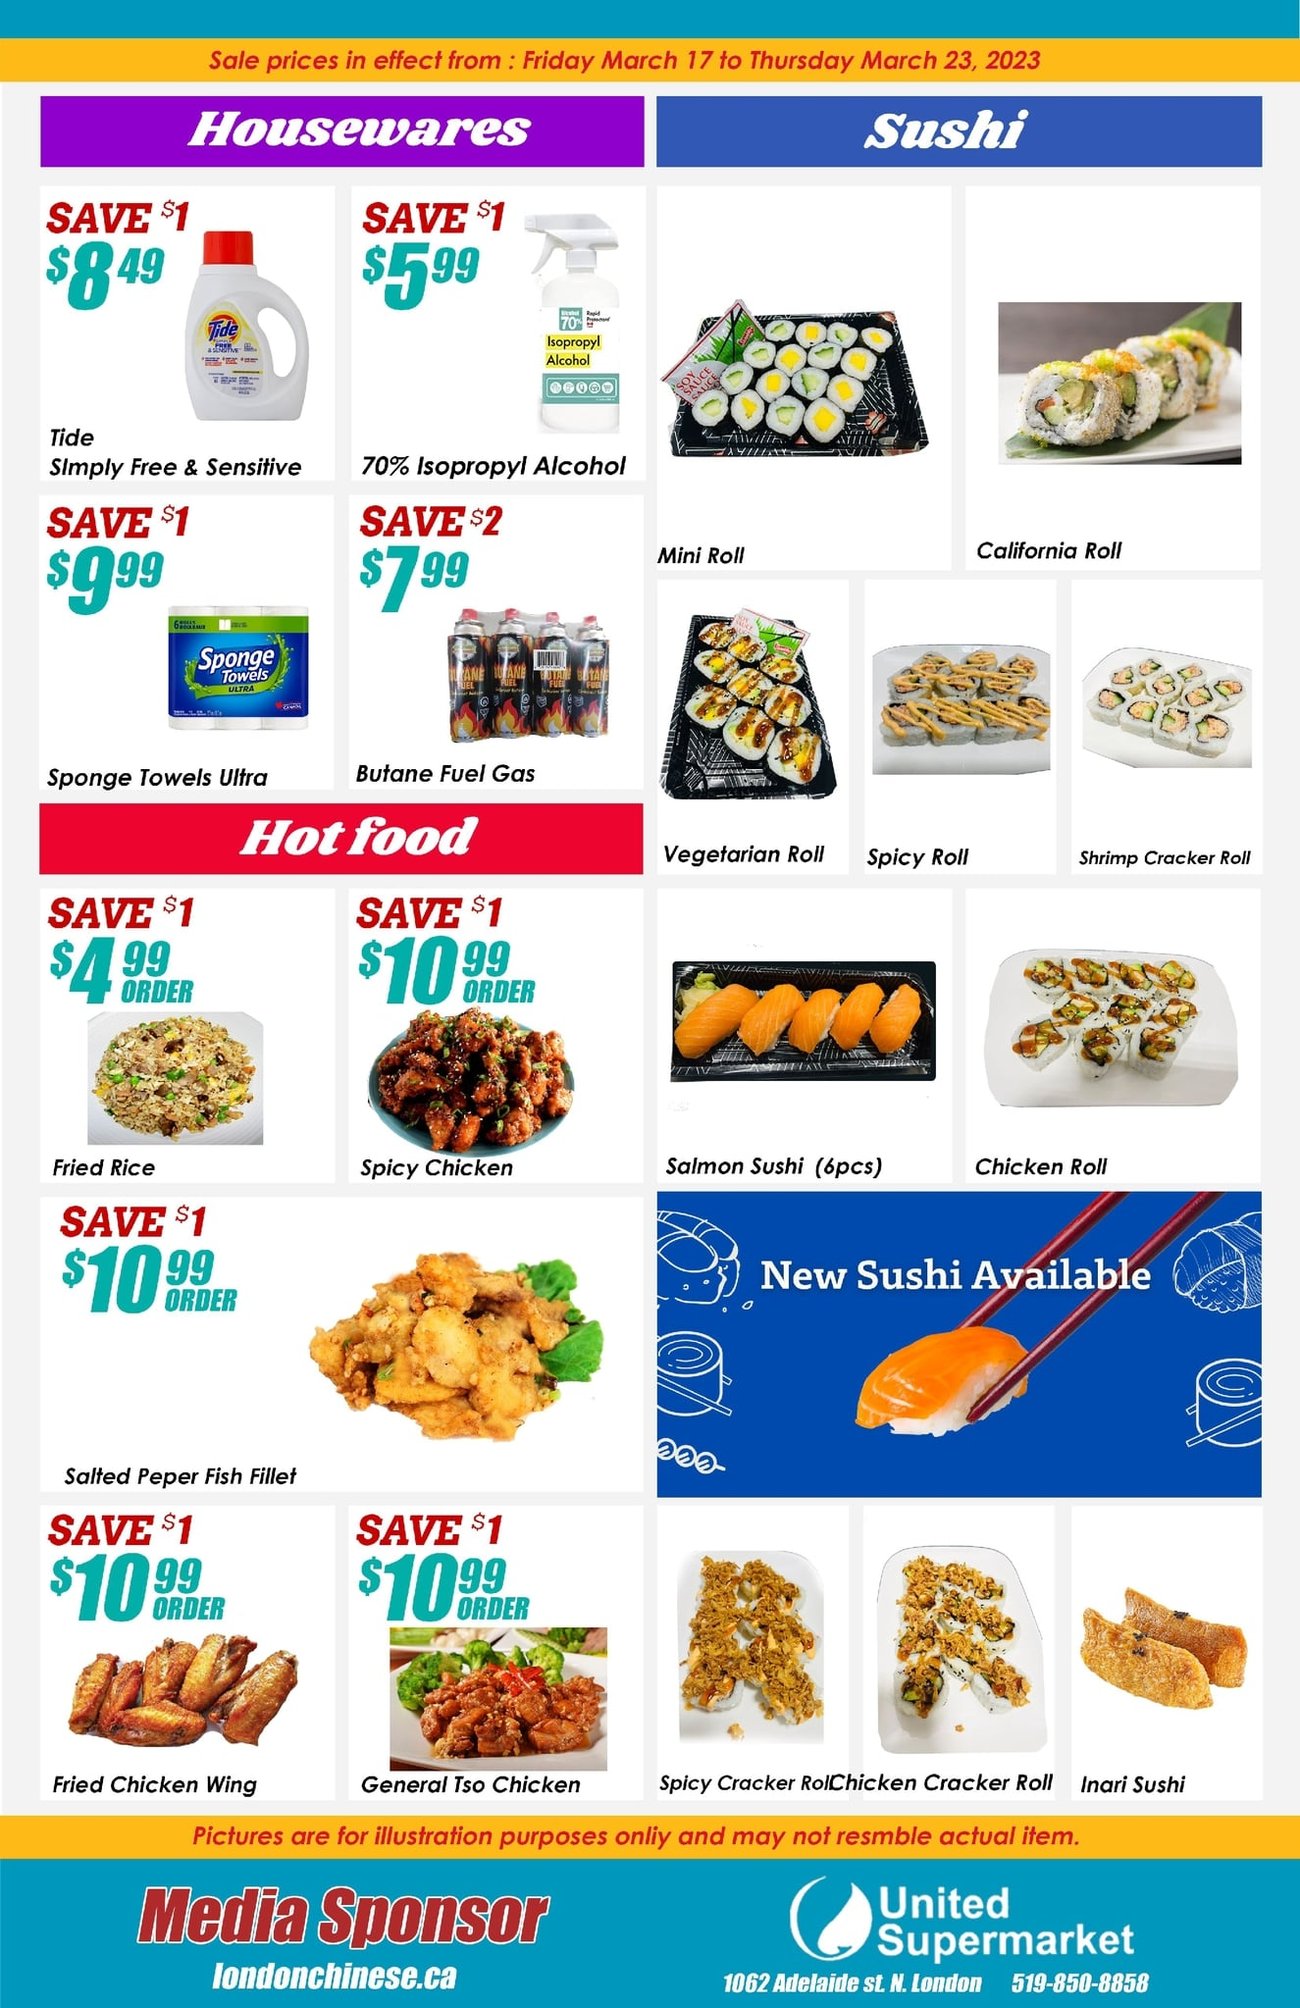 United Supermarket - Weekly Flyer Specials - Page 5